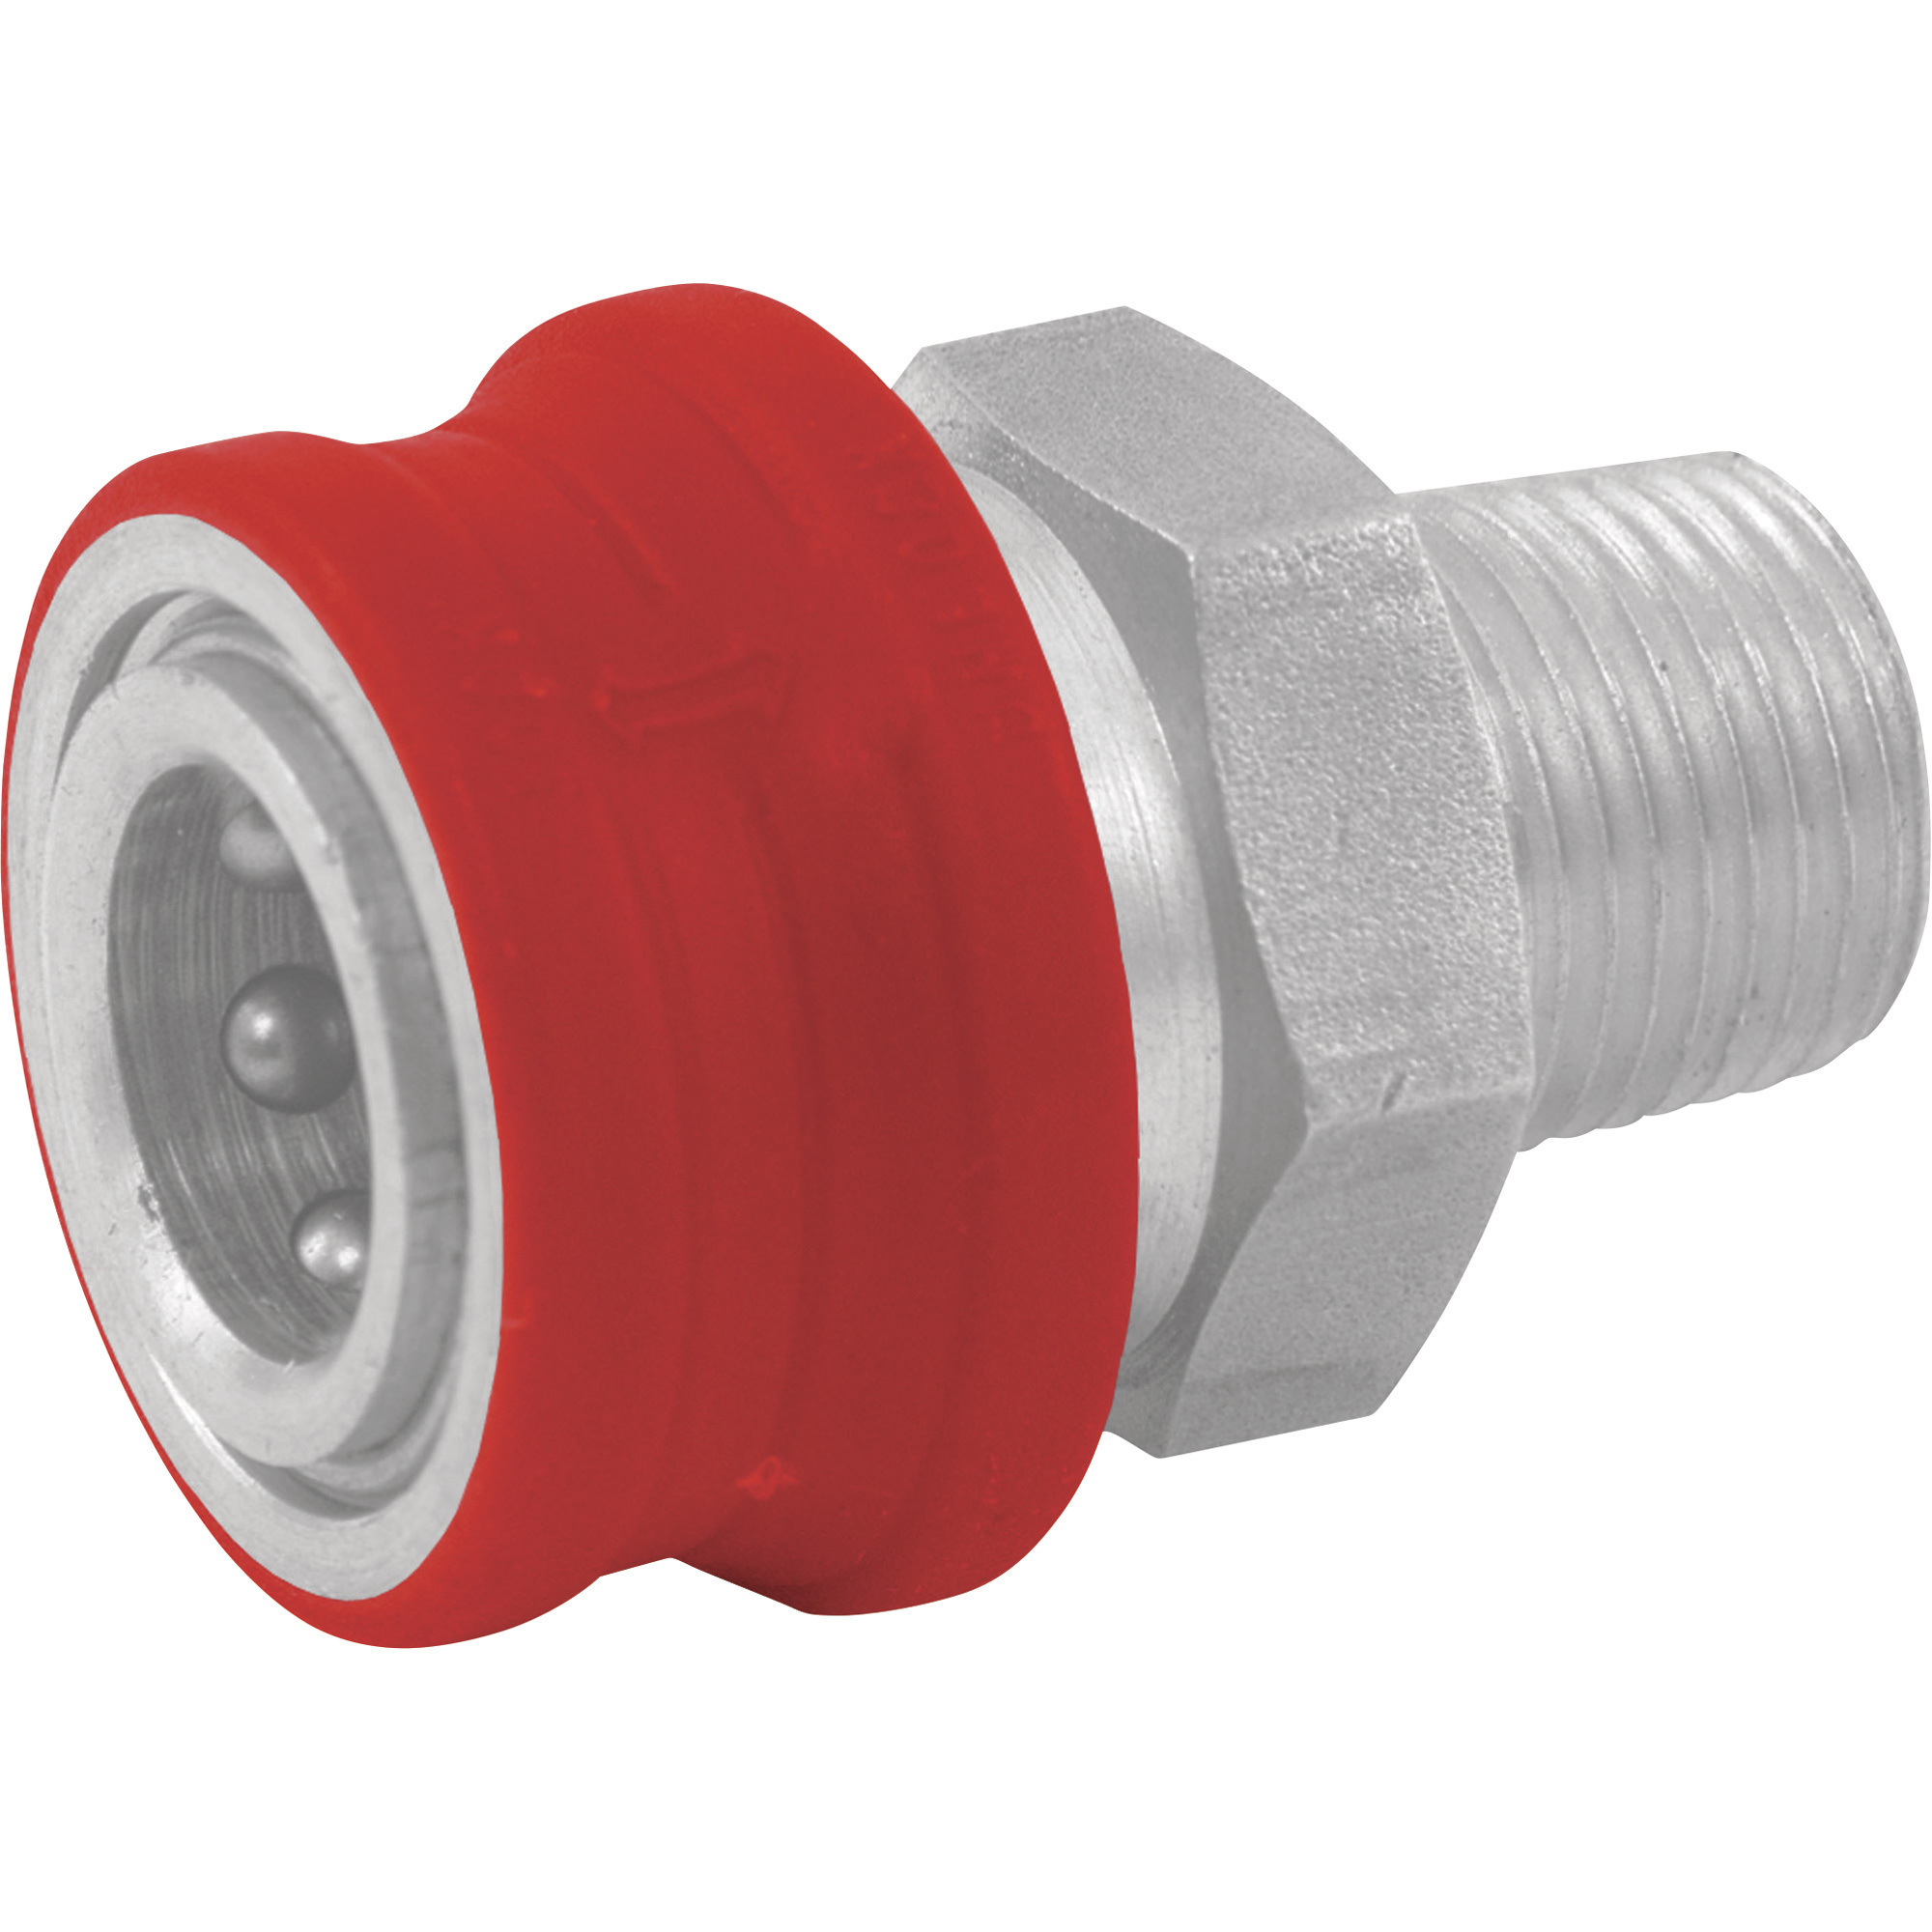 NorthStar Pressure Washer Insulated Quick-Connect Coupler â 3/8Inch NPT-M, 5000 PSI, 12.0 GPM, Stainless Steel, Model 2100388P